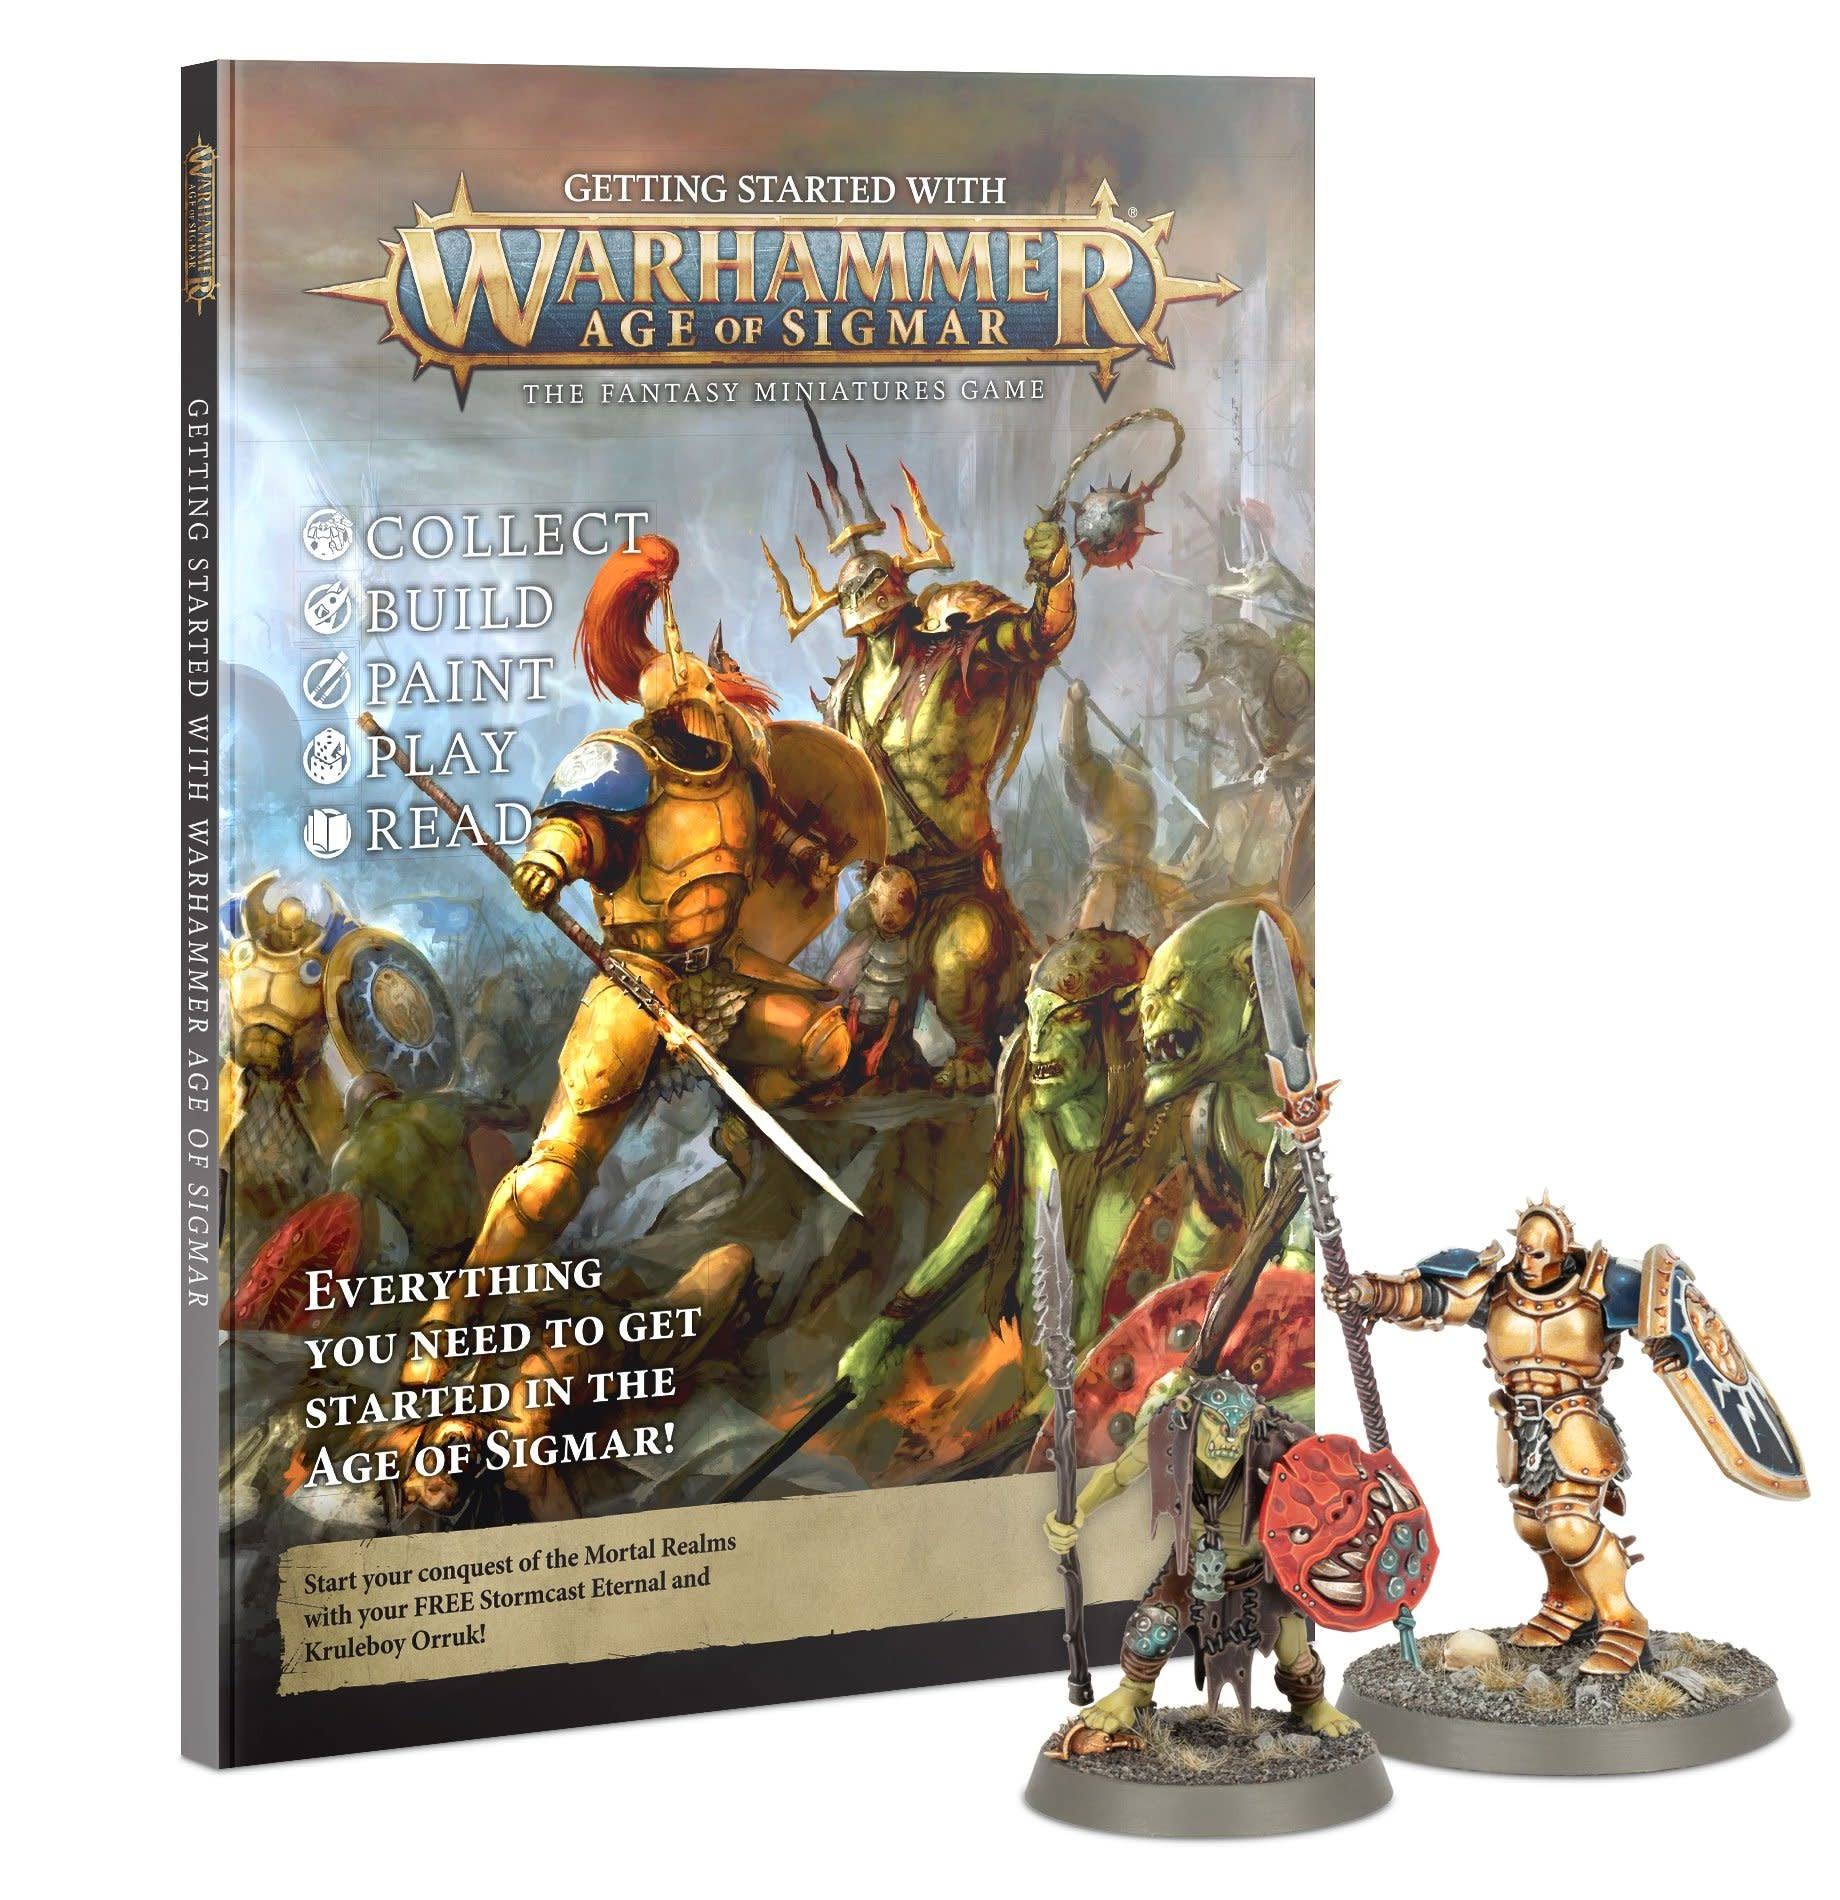 Getting Started with Warhammer Age of Sigmar: The Fantasy Miniatures Game